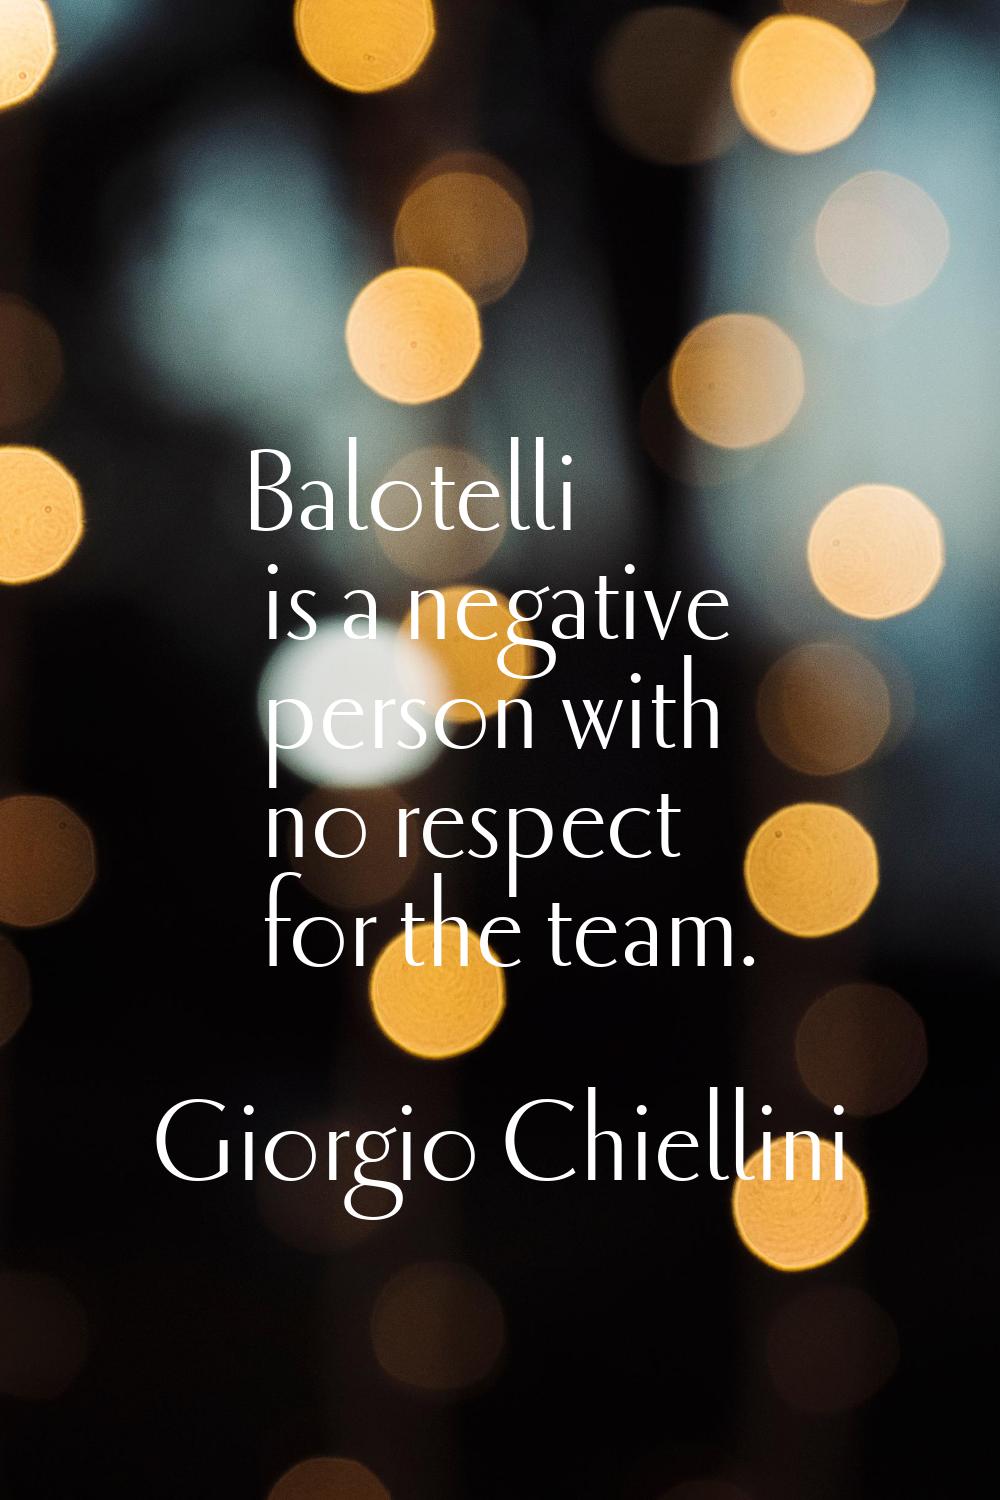 Balotelli is a negative person with no respect for the team.